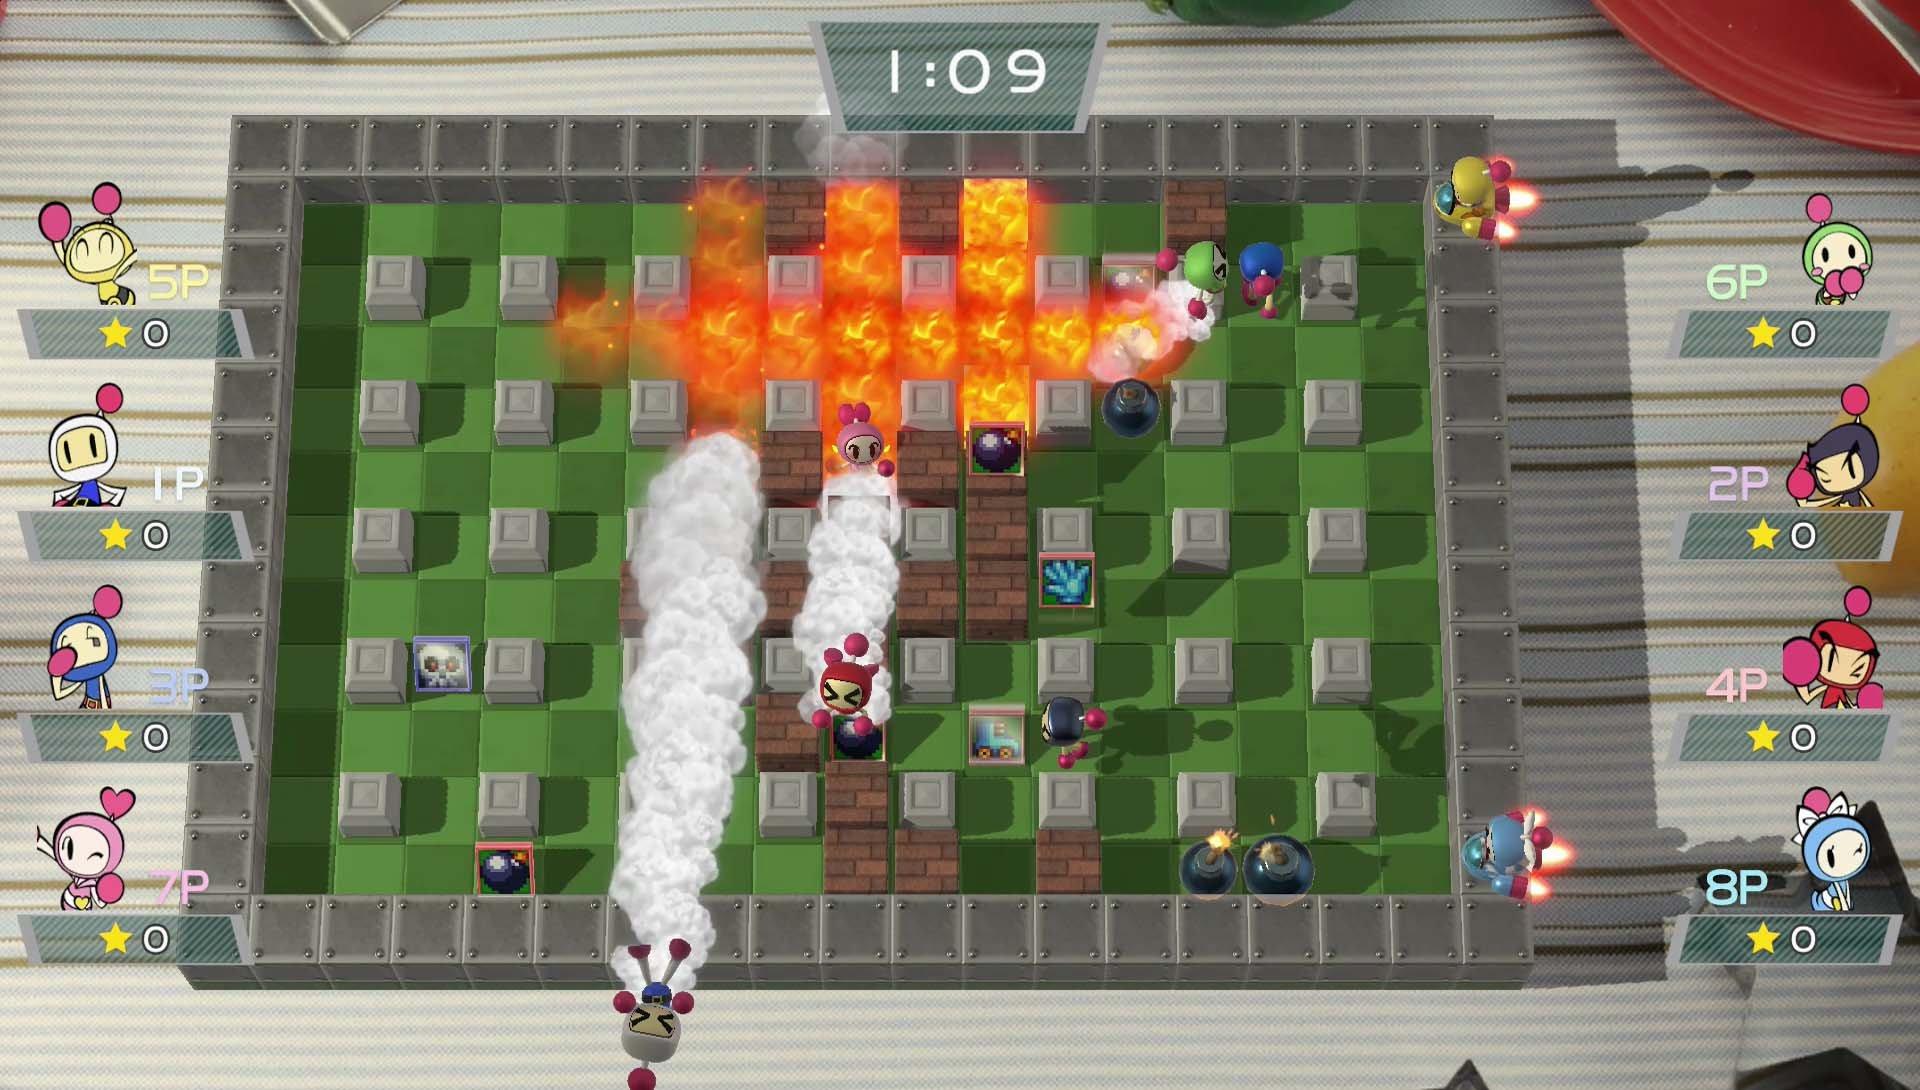 Super Bomberman R Online Available Now on Xbox One and Xbox Series X